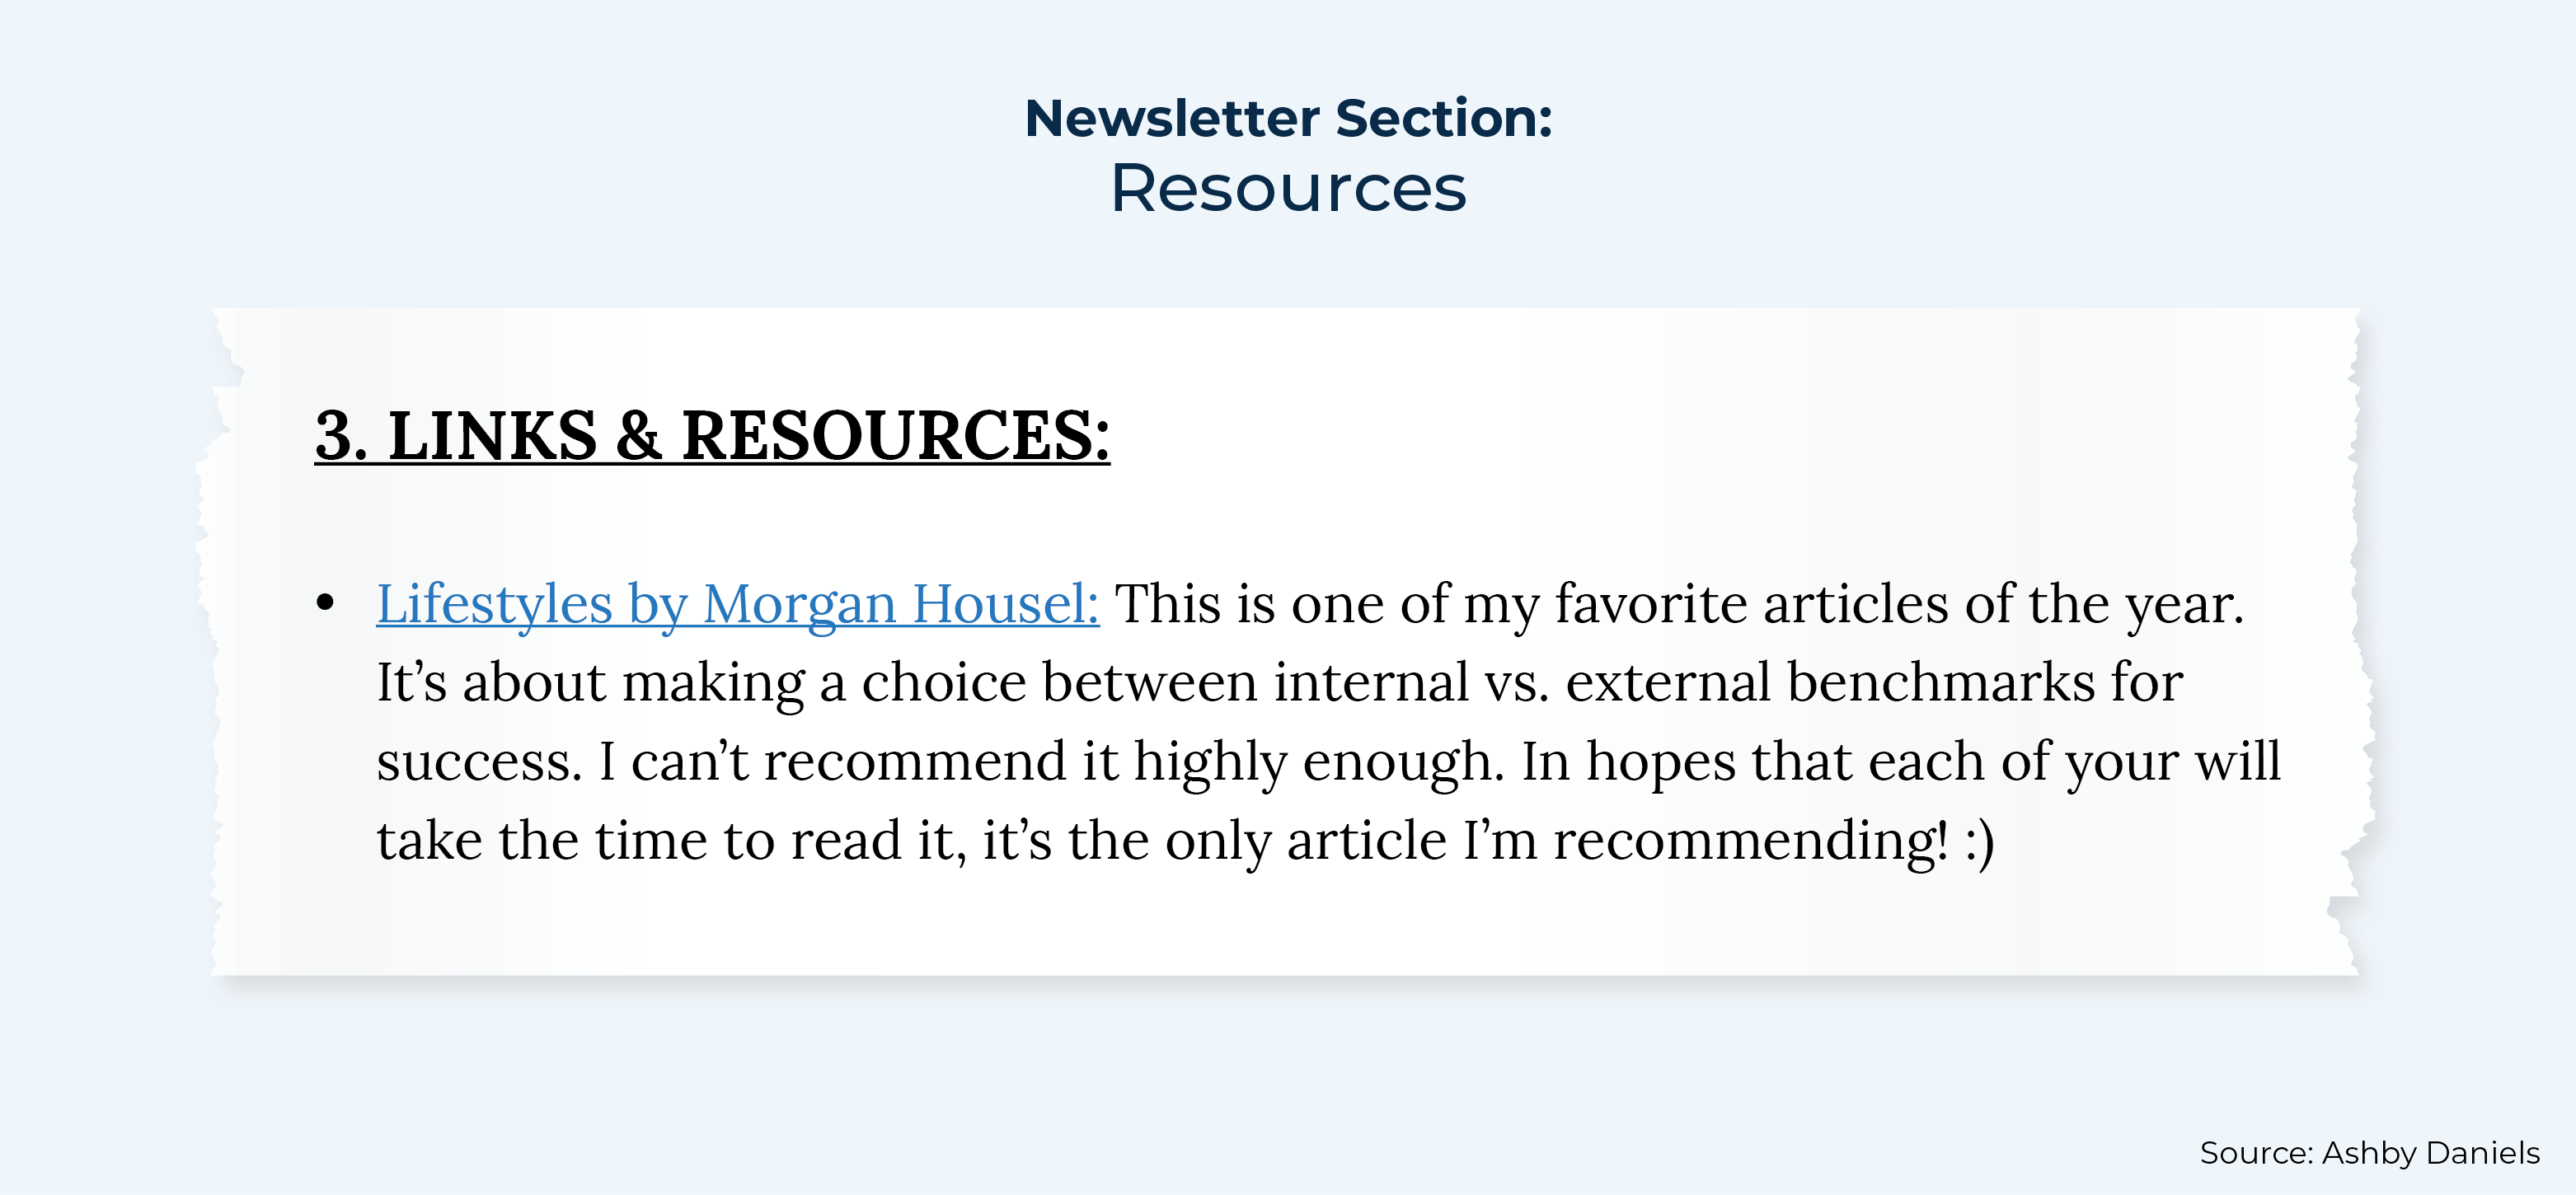 Newsletter Section Resources